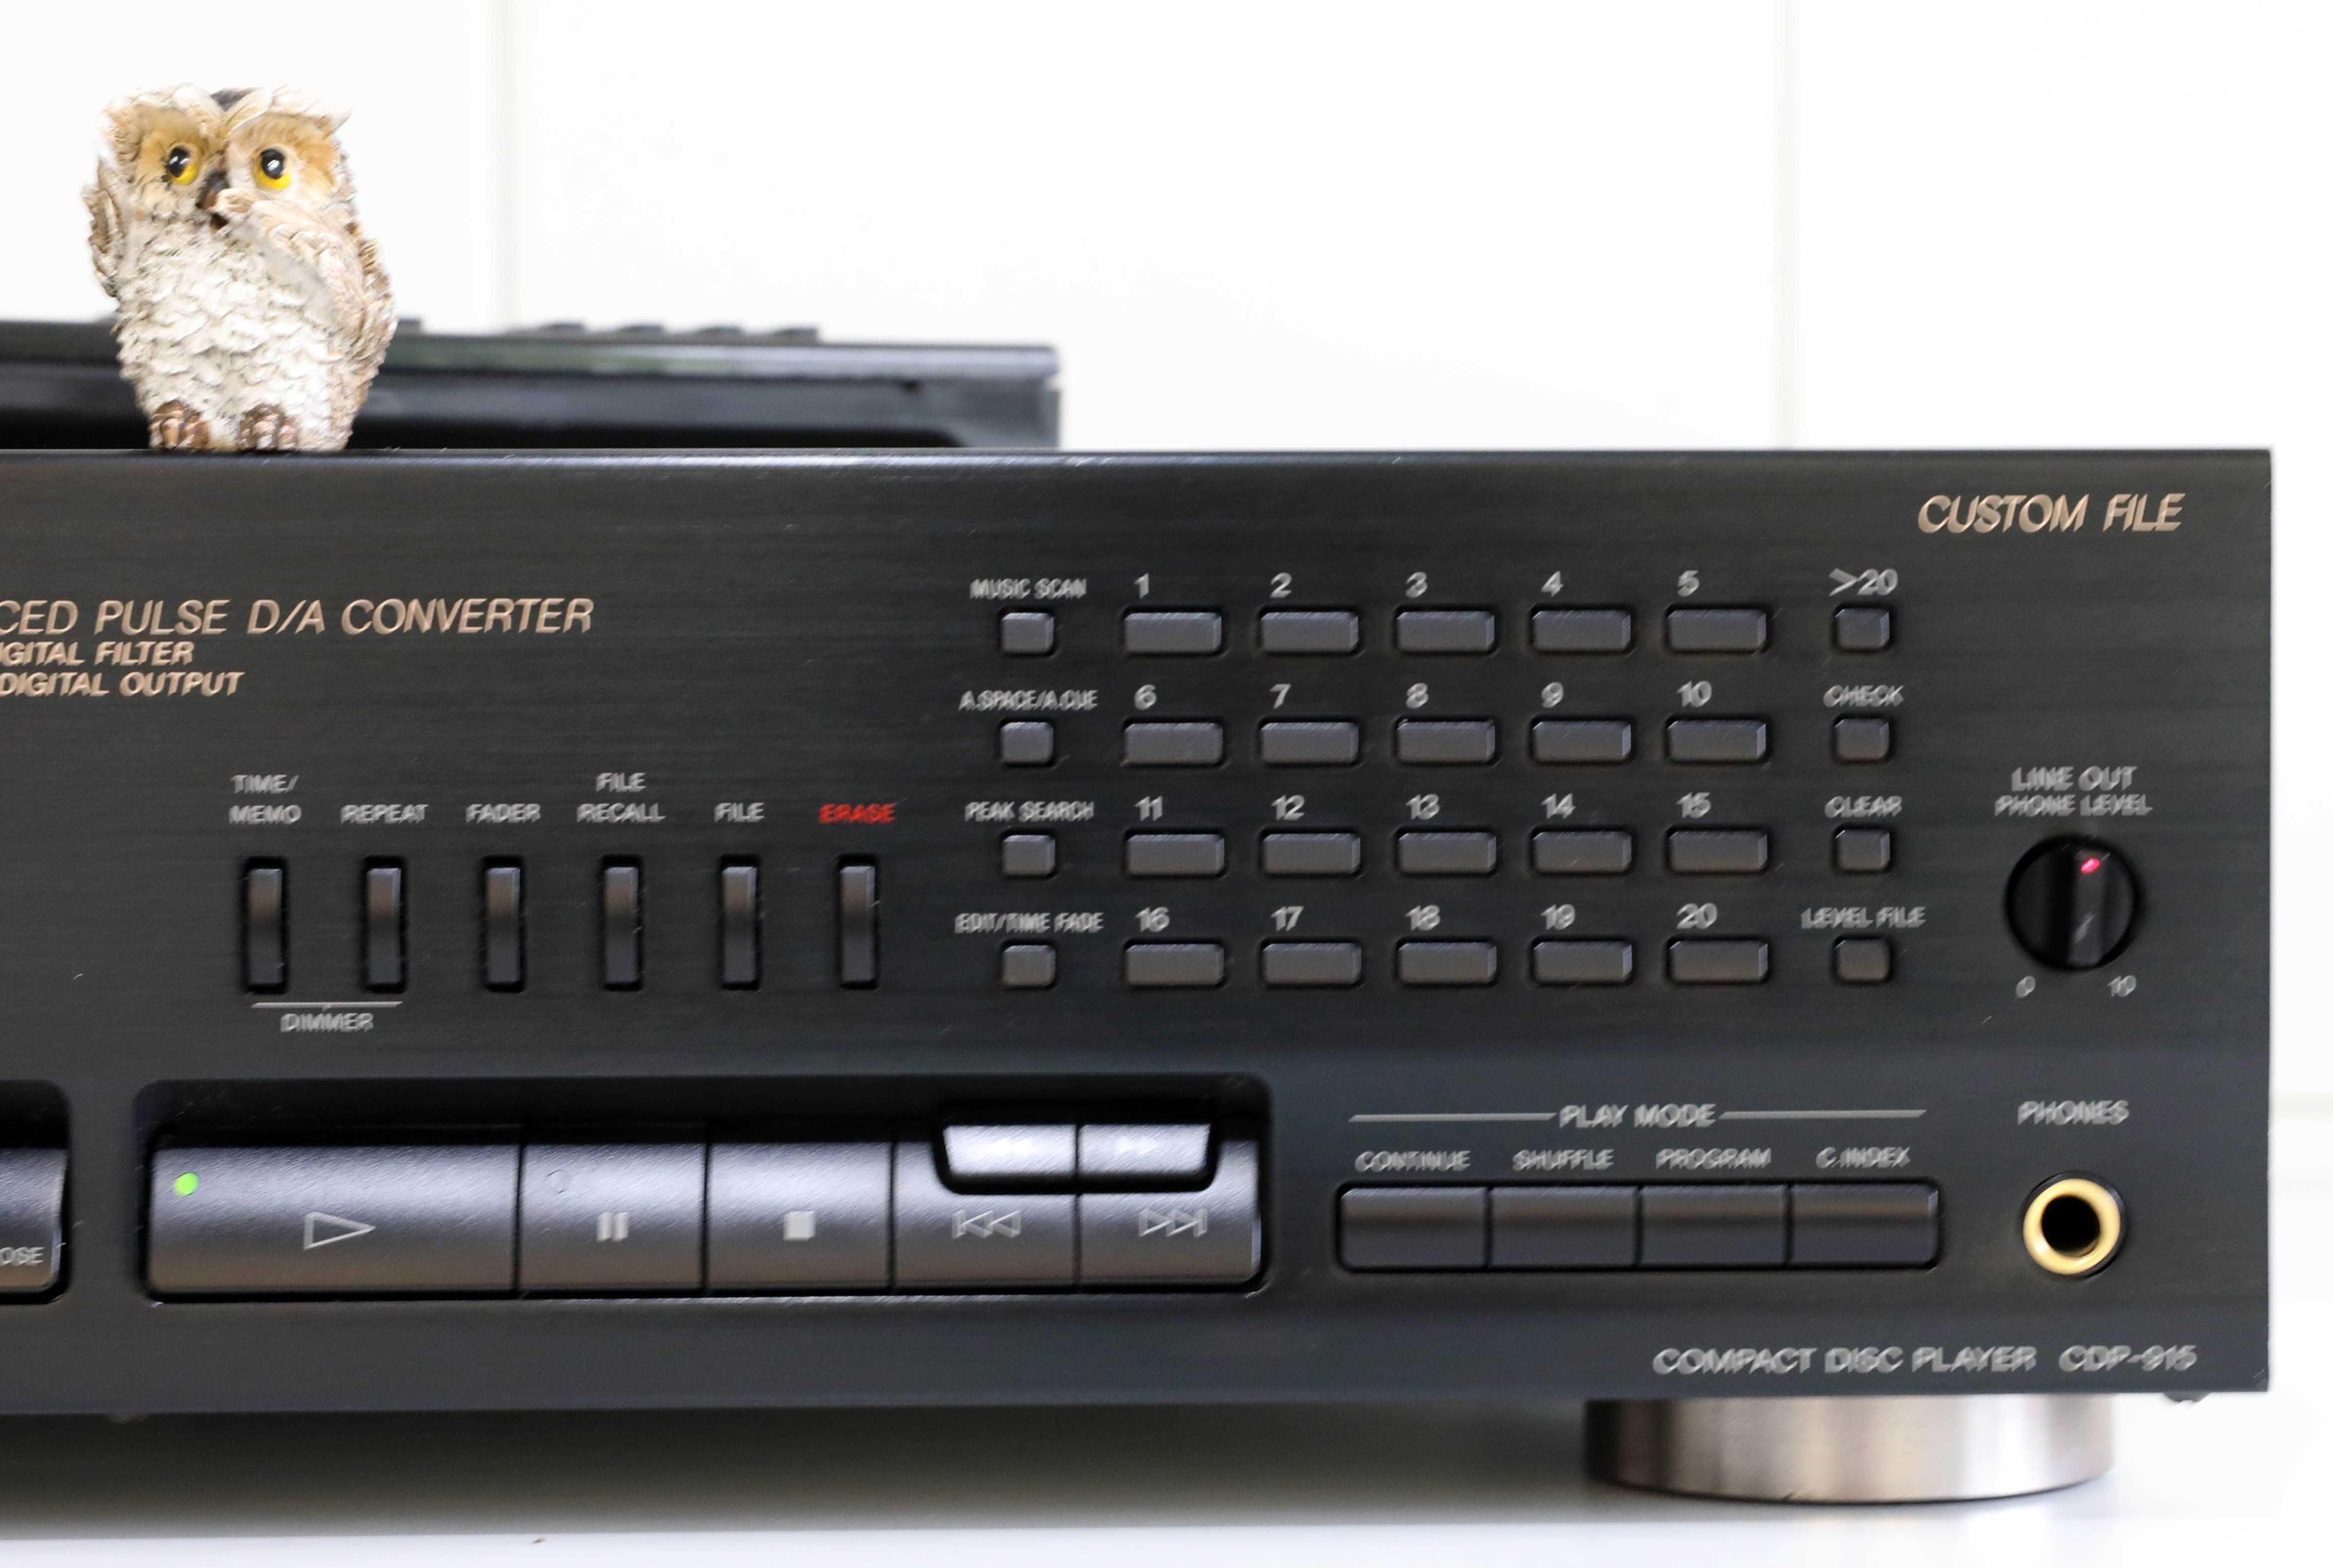 Sony CDP-915 Compact Disc Player